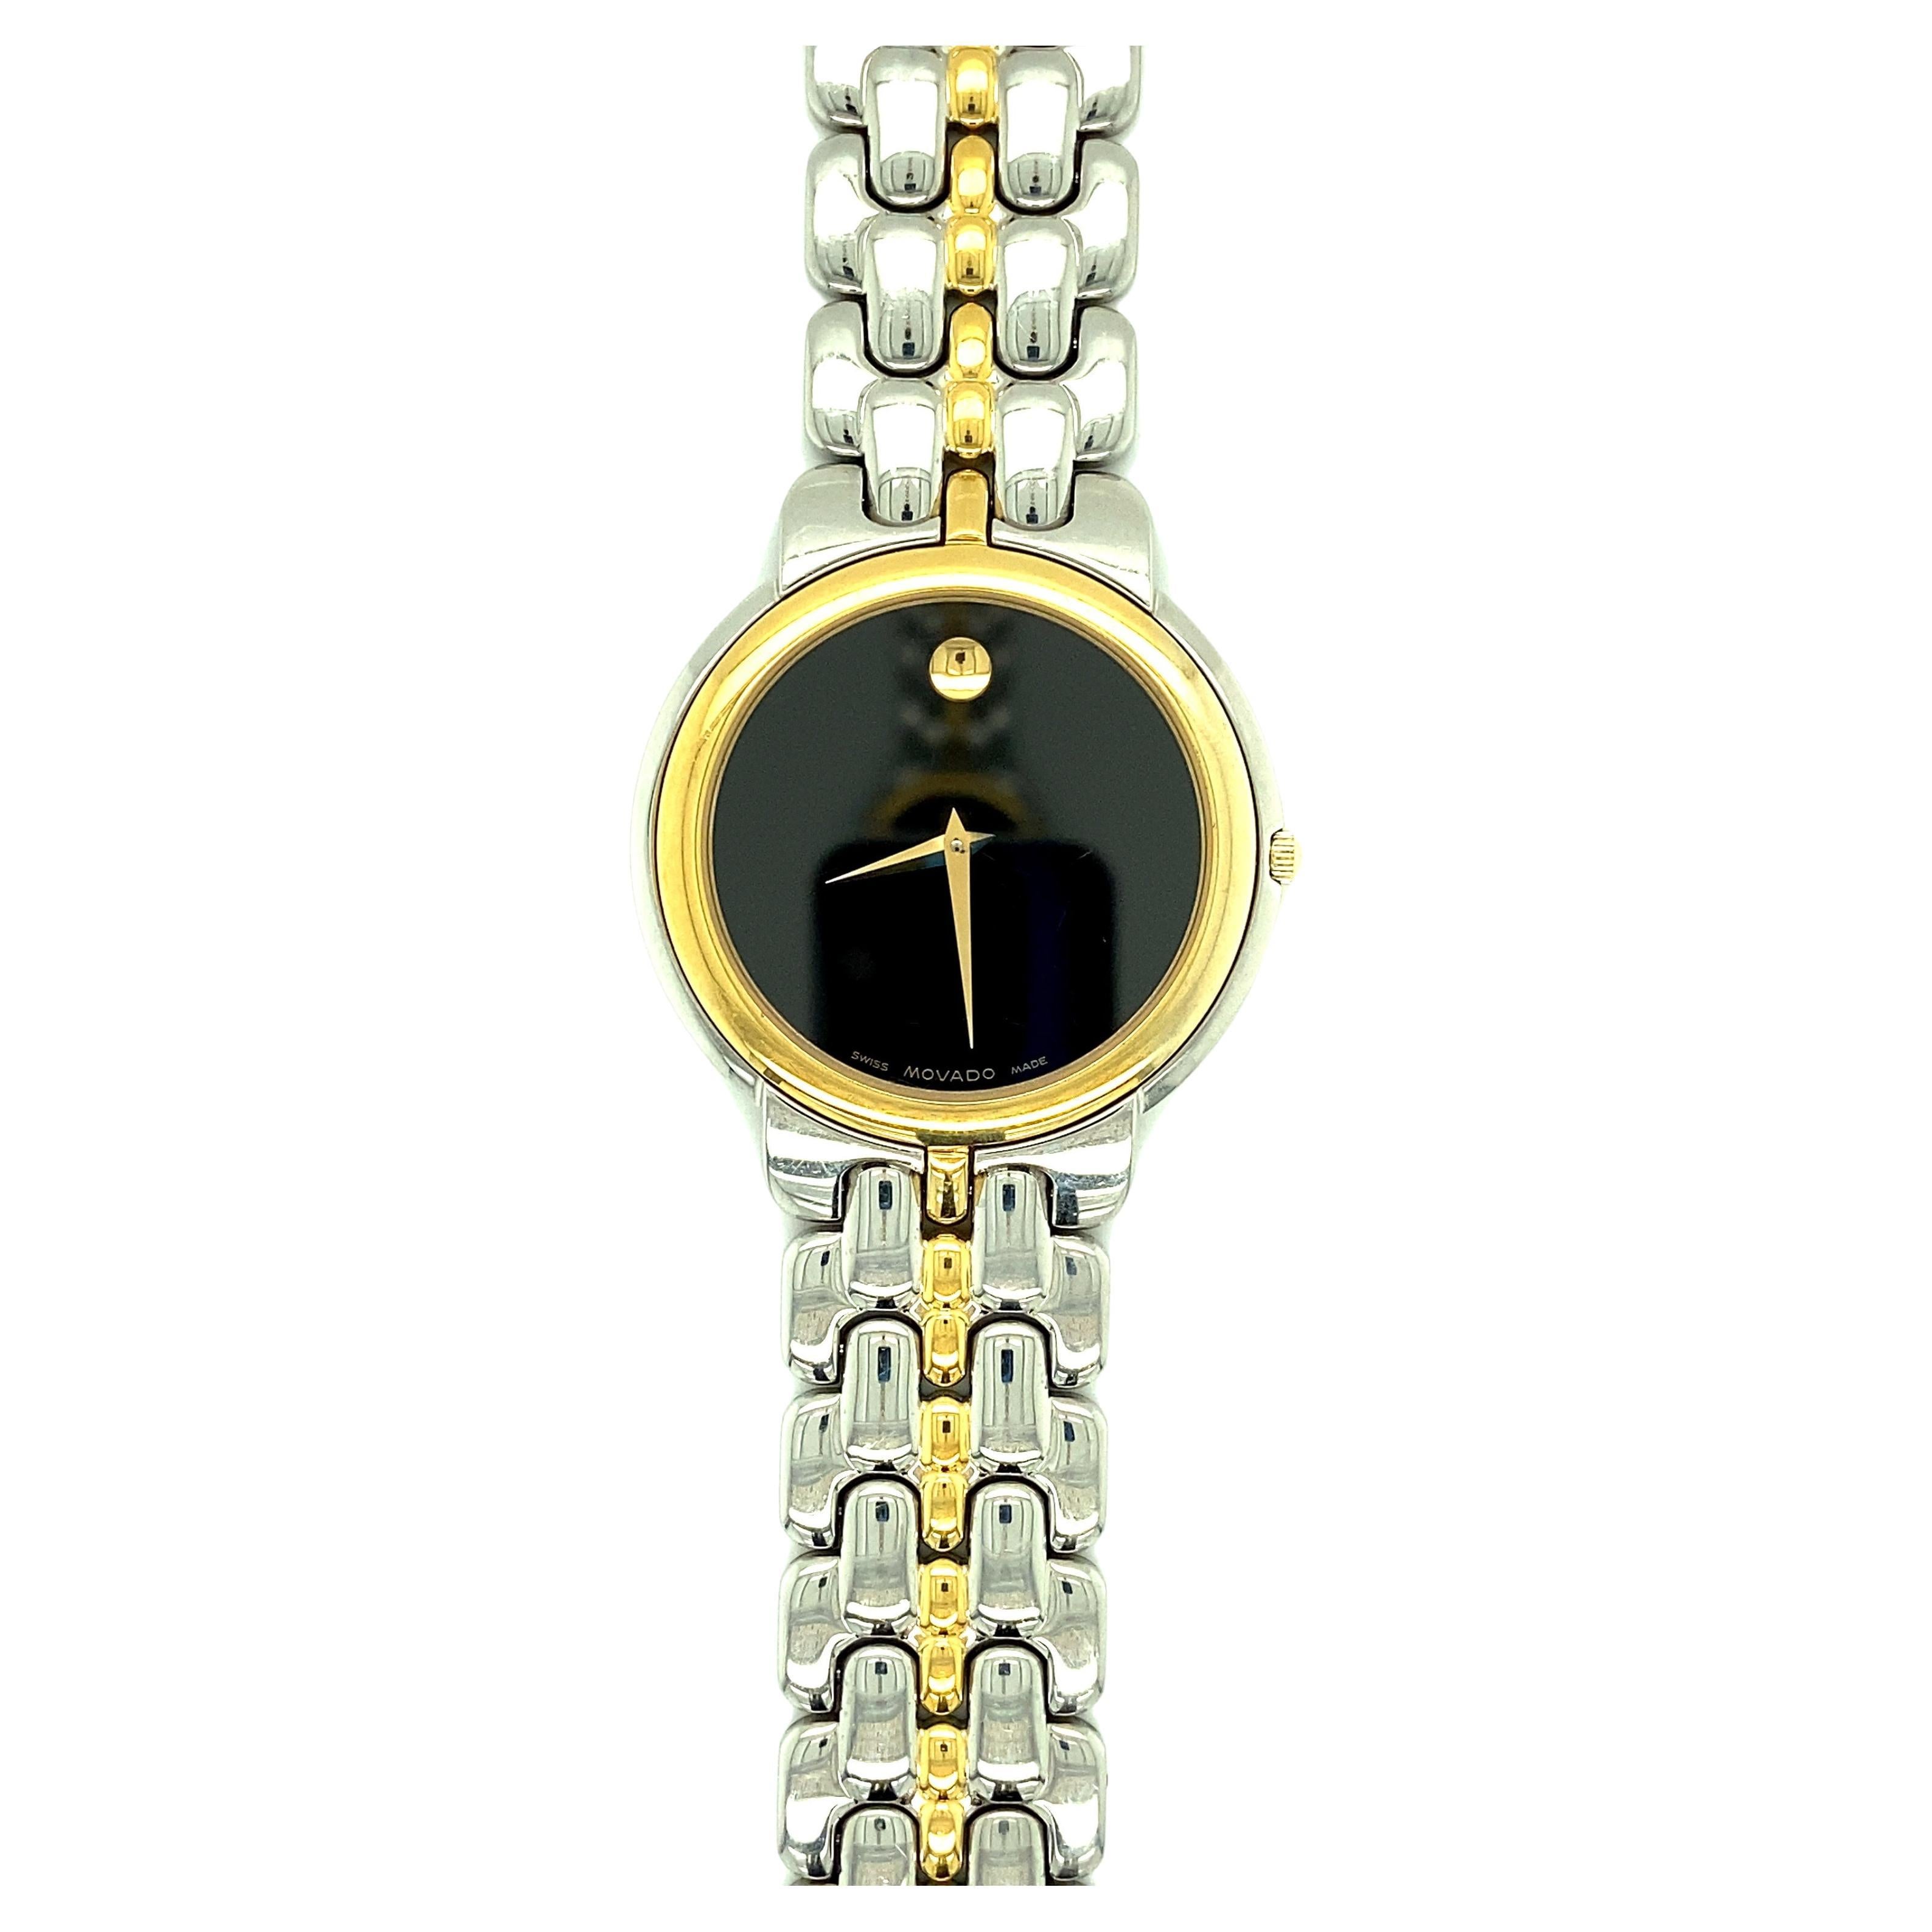 One Movado Swiss Quartz Museum black dial men's 35MM two-tone watch, 8I.A2.873.I  6715890, in stainless steel and gold plated stainless steel.

